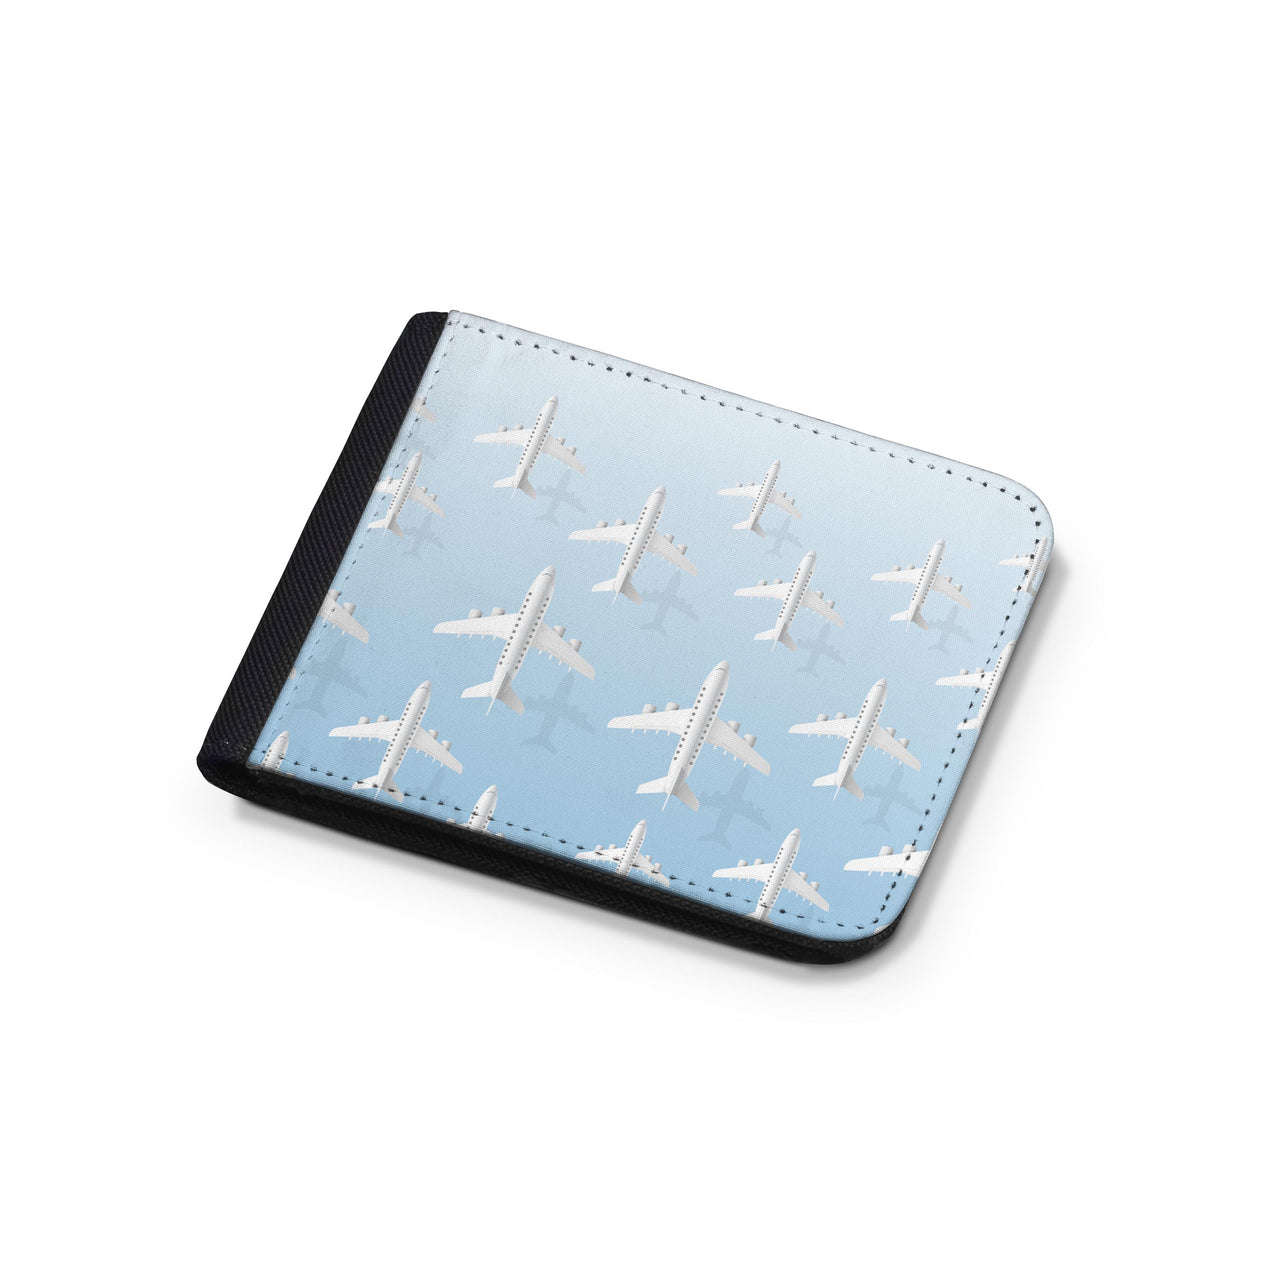 White Seamless Airplanes & Shadows Designed Wallets